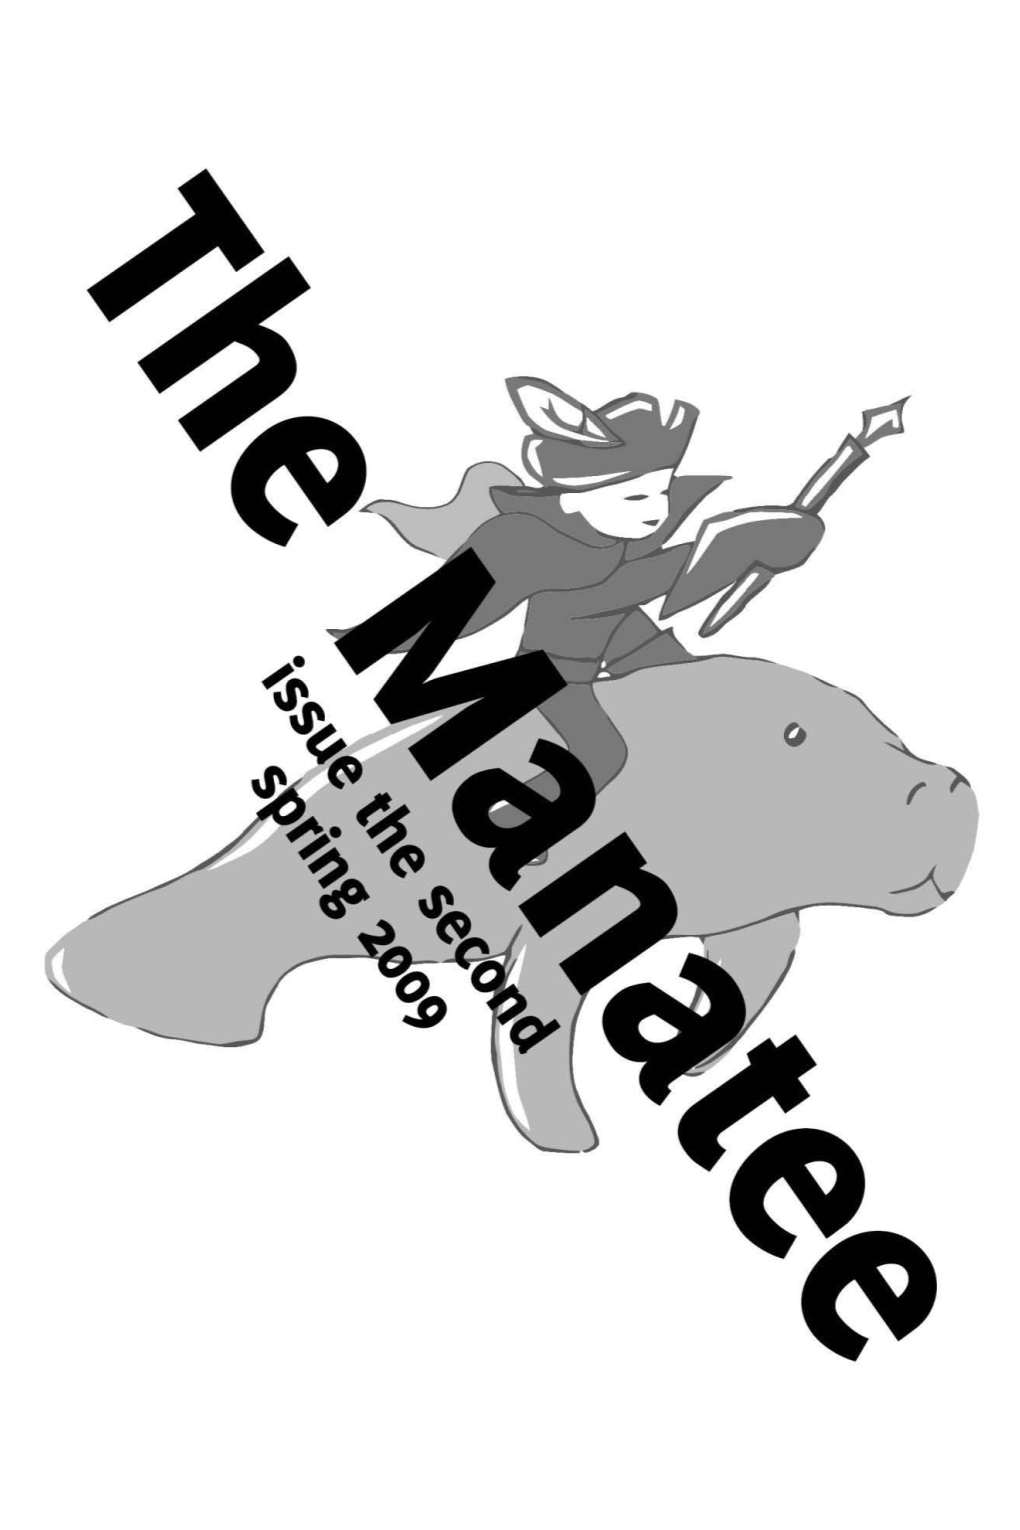 The Manatee Is a Literary Journal Run by the Students of Southern New Hampshire University